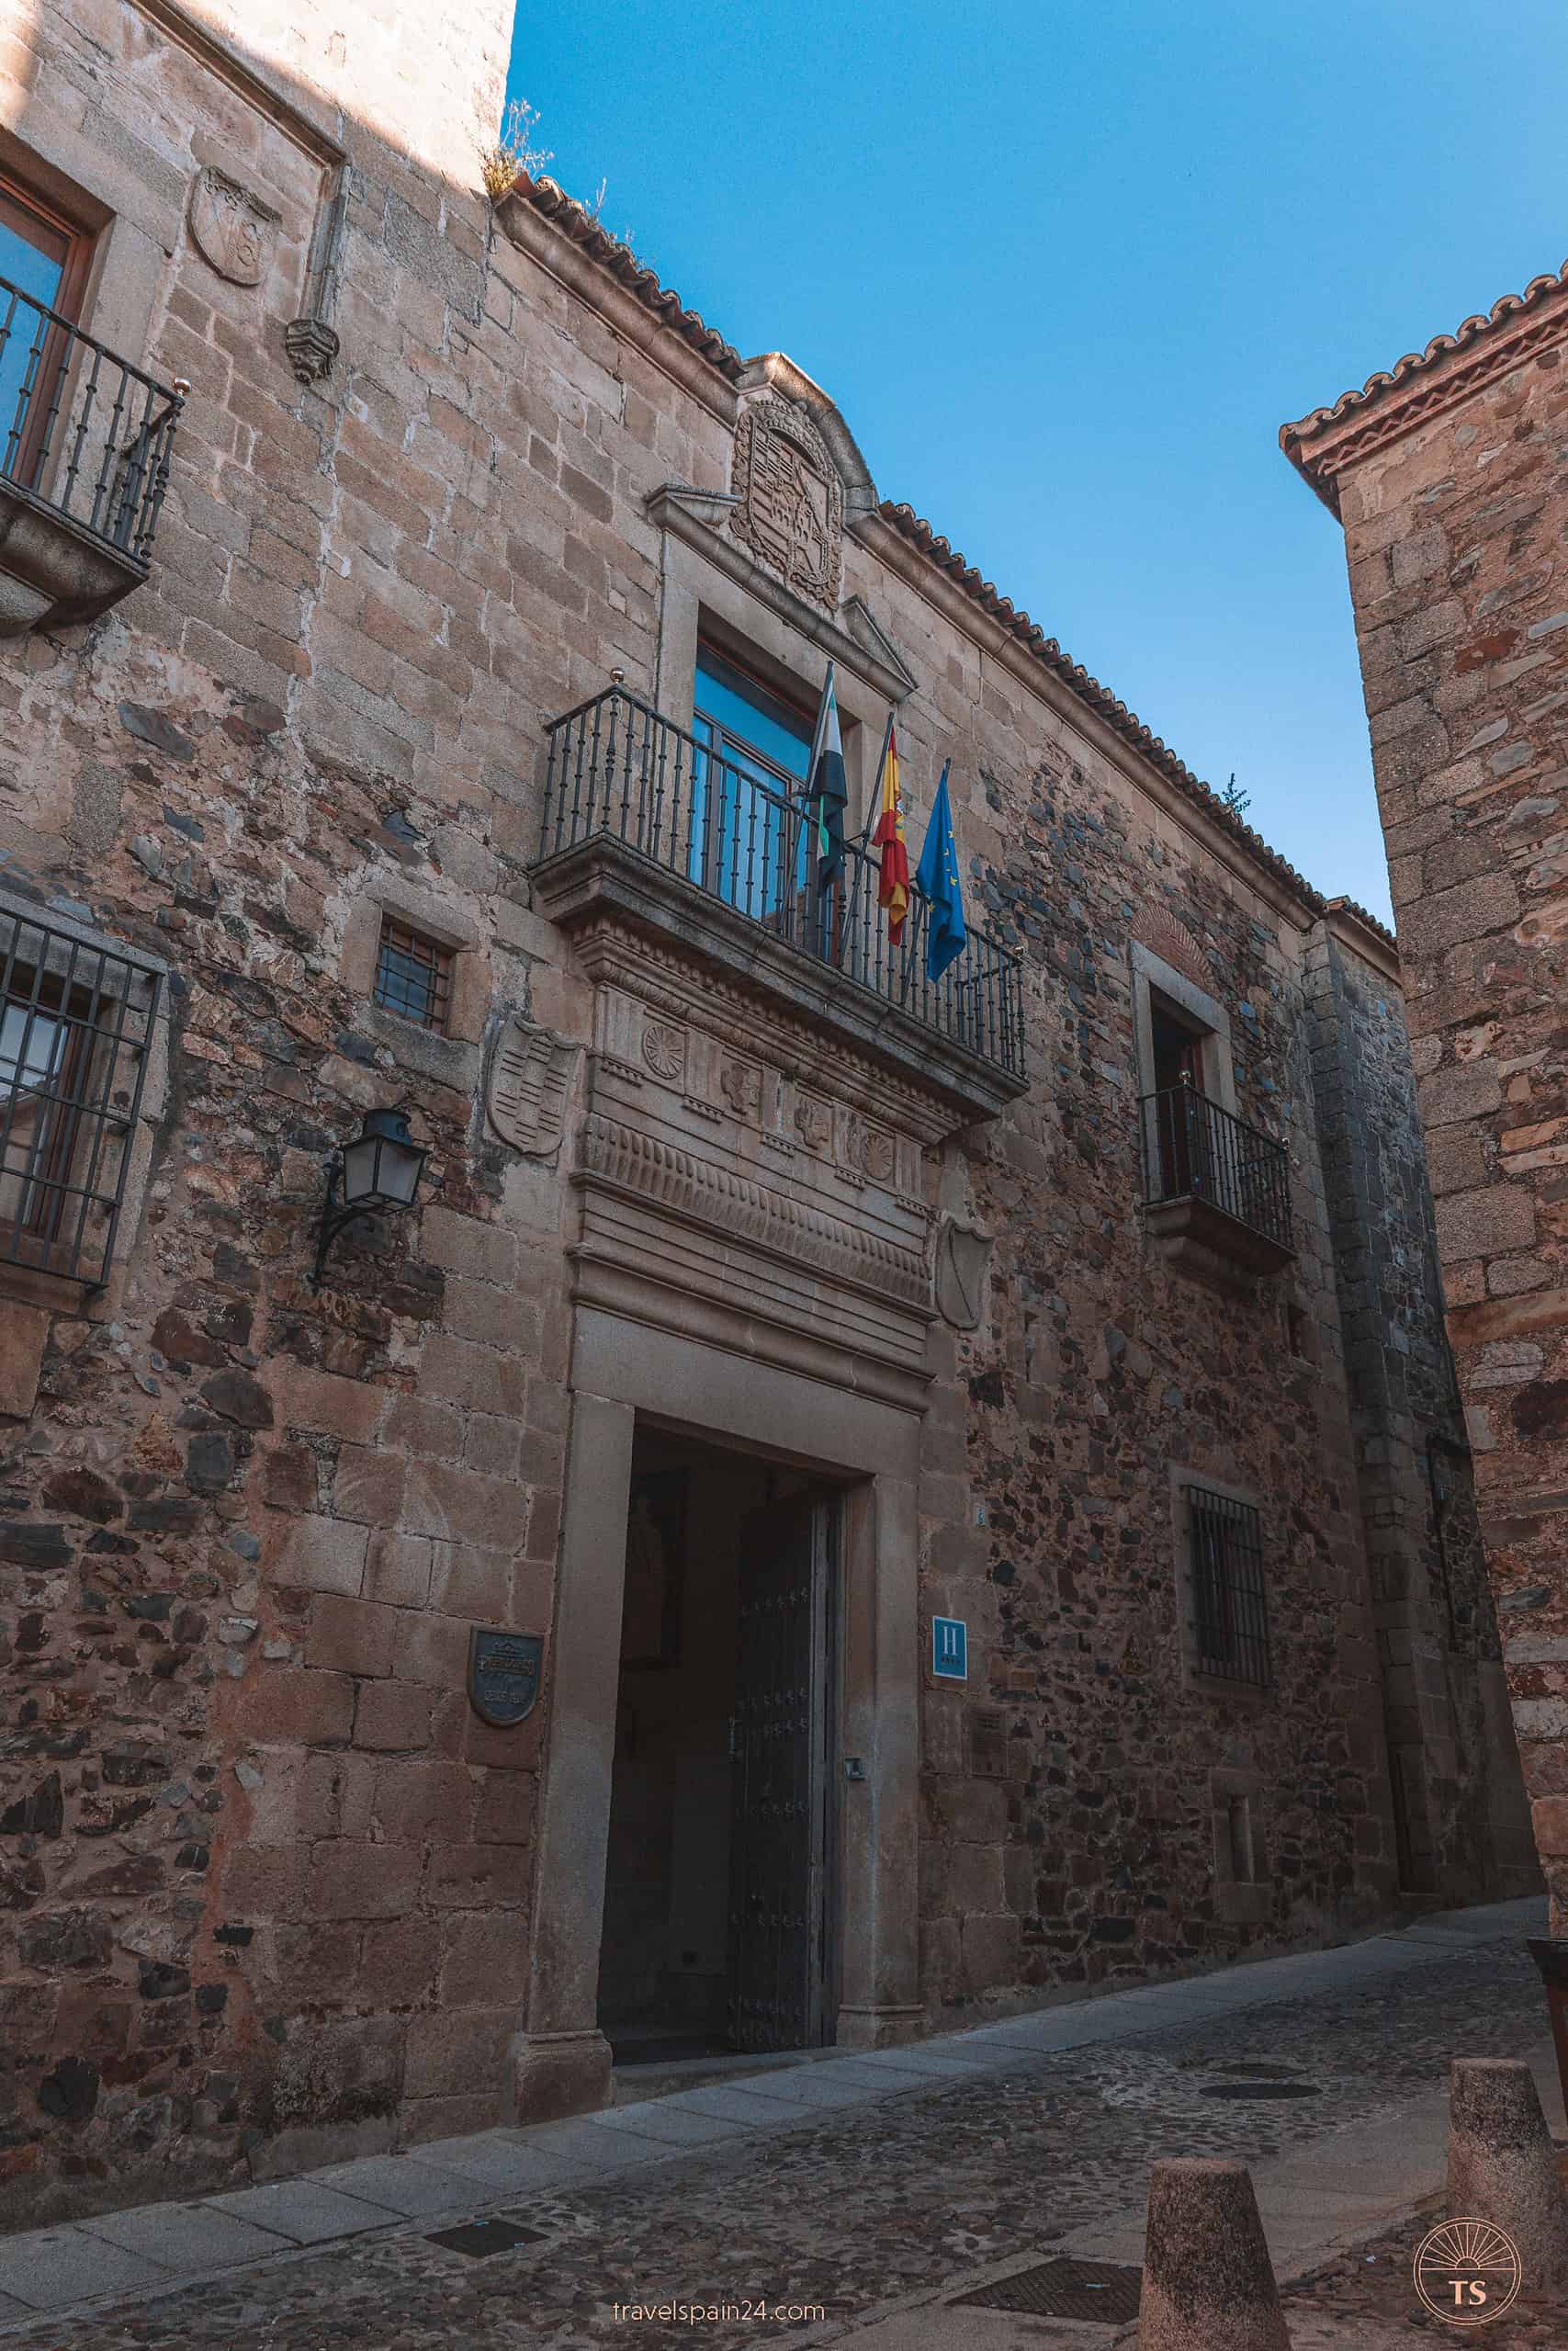 Entrance to Parador de Cáceres located in a quaint alley, marked by three flags fluttering above the doorway, welcoming visitors into the charm of Cáceres.